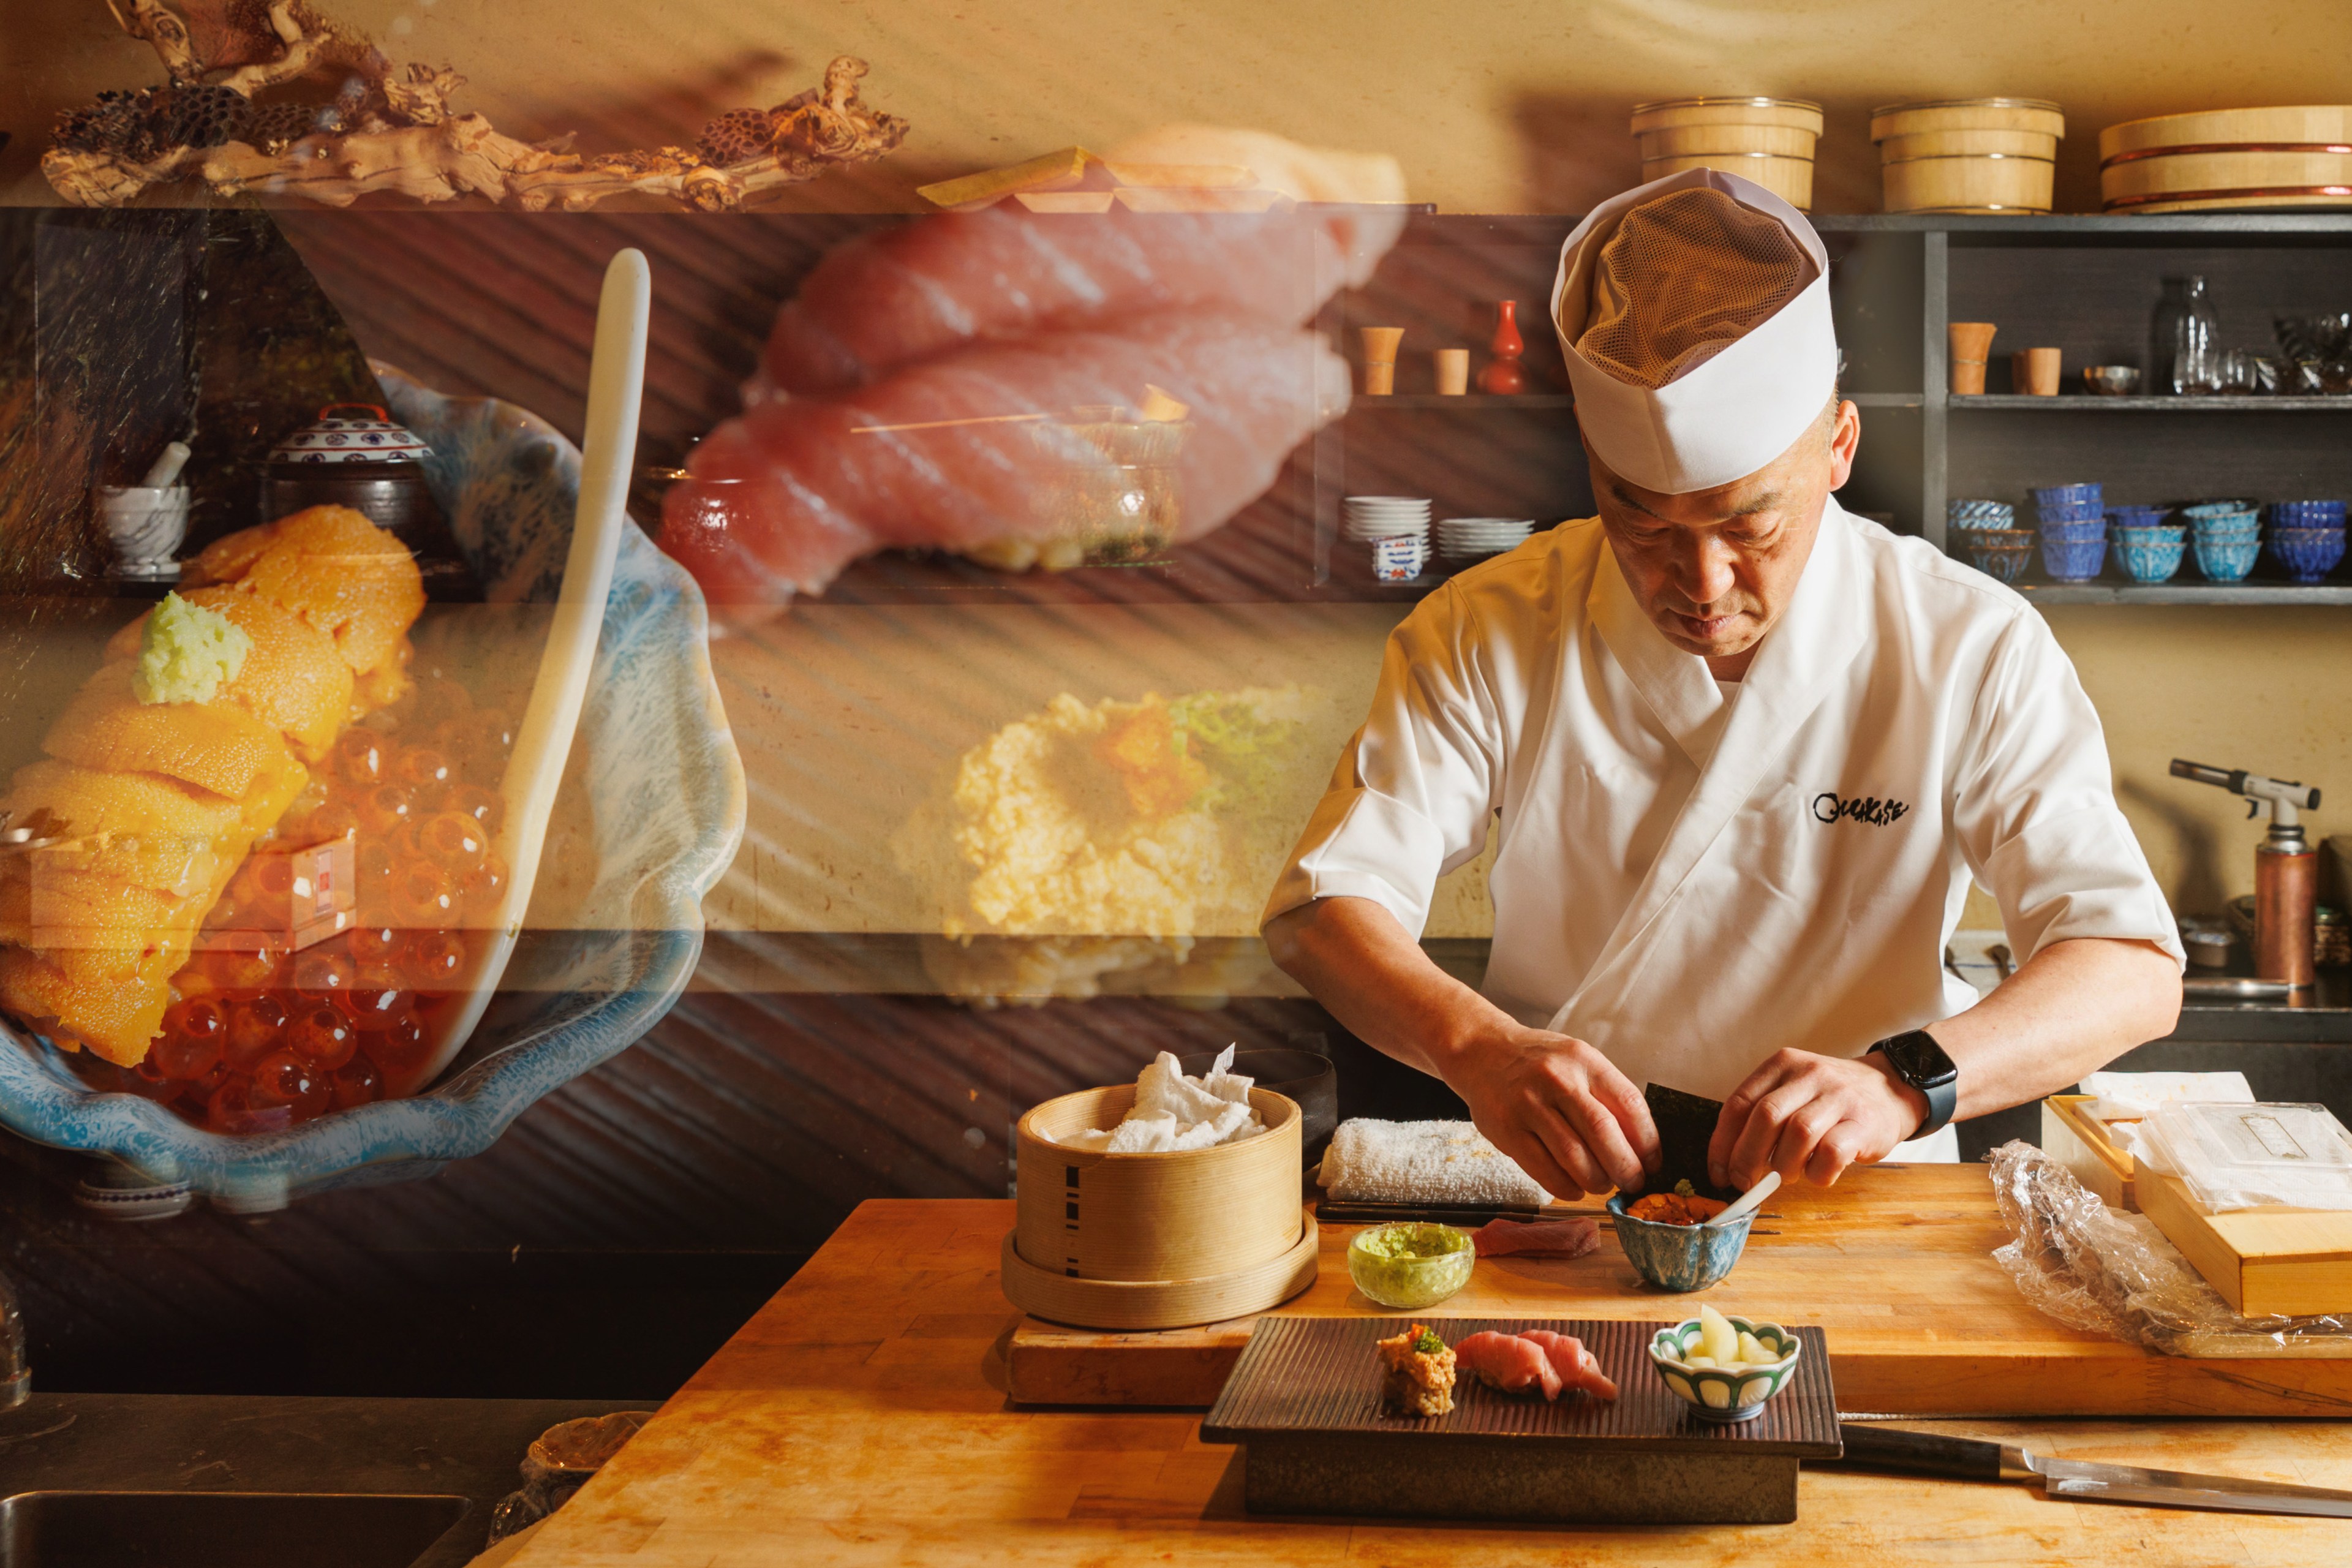 A sushi chef, dressed in white, prepares an intricate dish at a wooden counter with sushi and various ingredients. The background shows bowls and kitchen shelves.